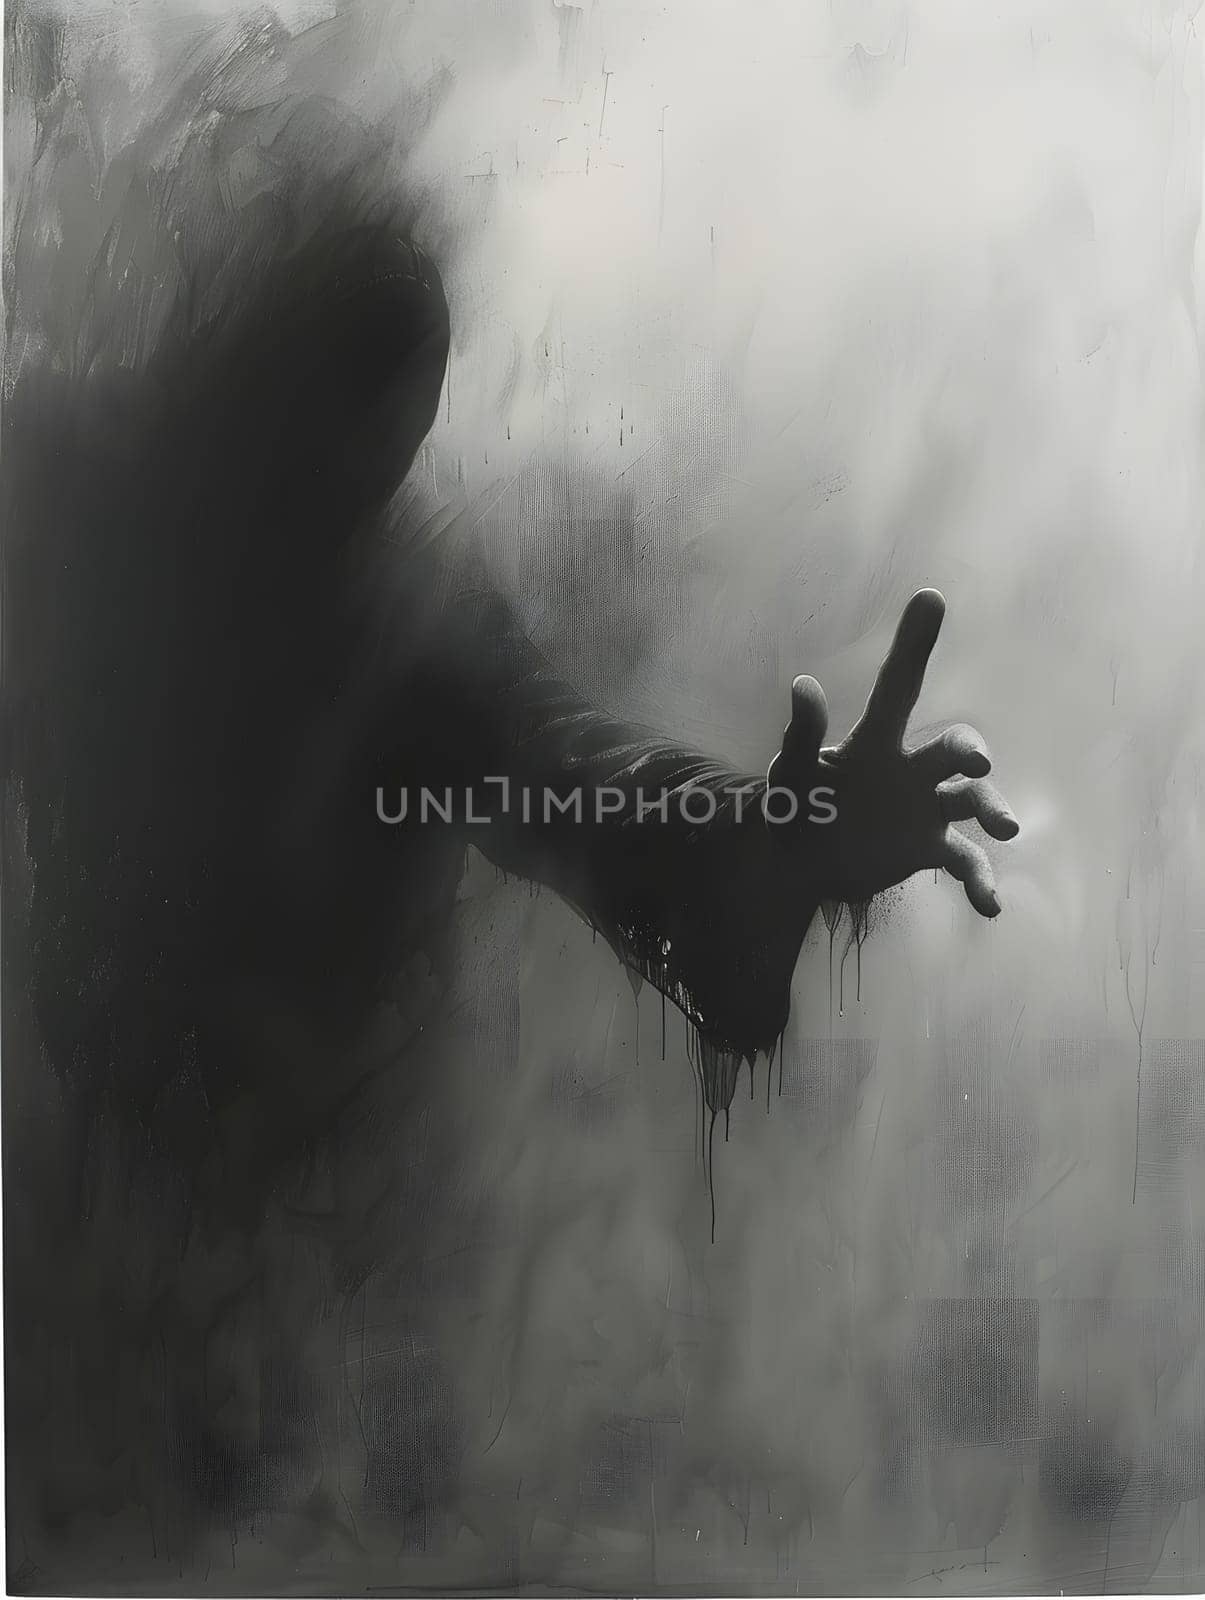 A monochrome photograph captures a silhouette behind a foggy glass, with a hand reaching out in a gesture of darkness and mystery. This visual art portrays an event shrouded in mist and smoke